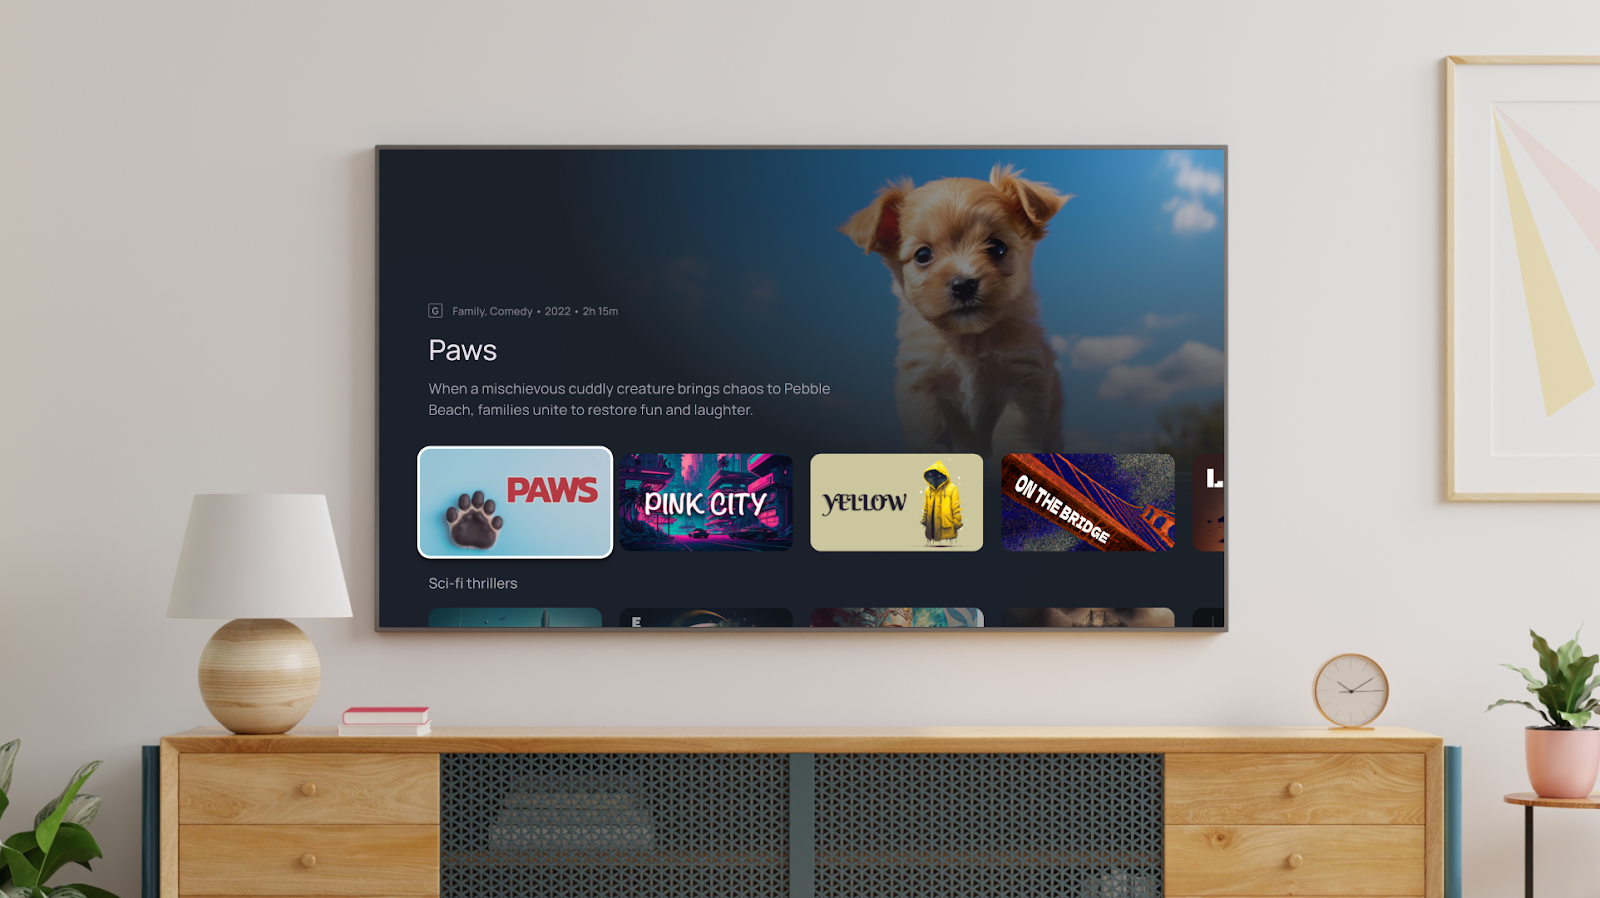 image of a wall mounted, flat screen television in a modern home. The screen is showing the preview for a show titled 'Paws' with an adorable puppy as the show's star, and a Watch Now button